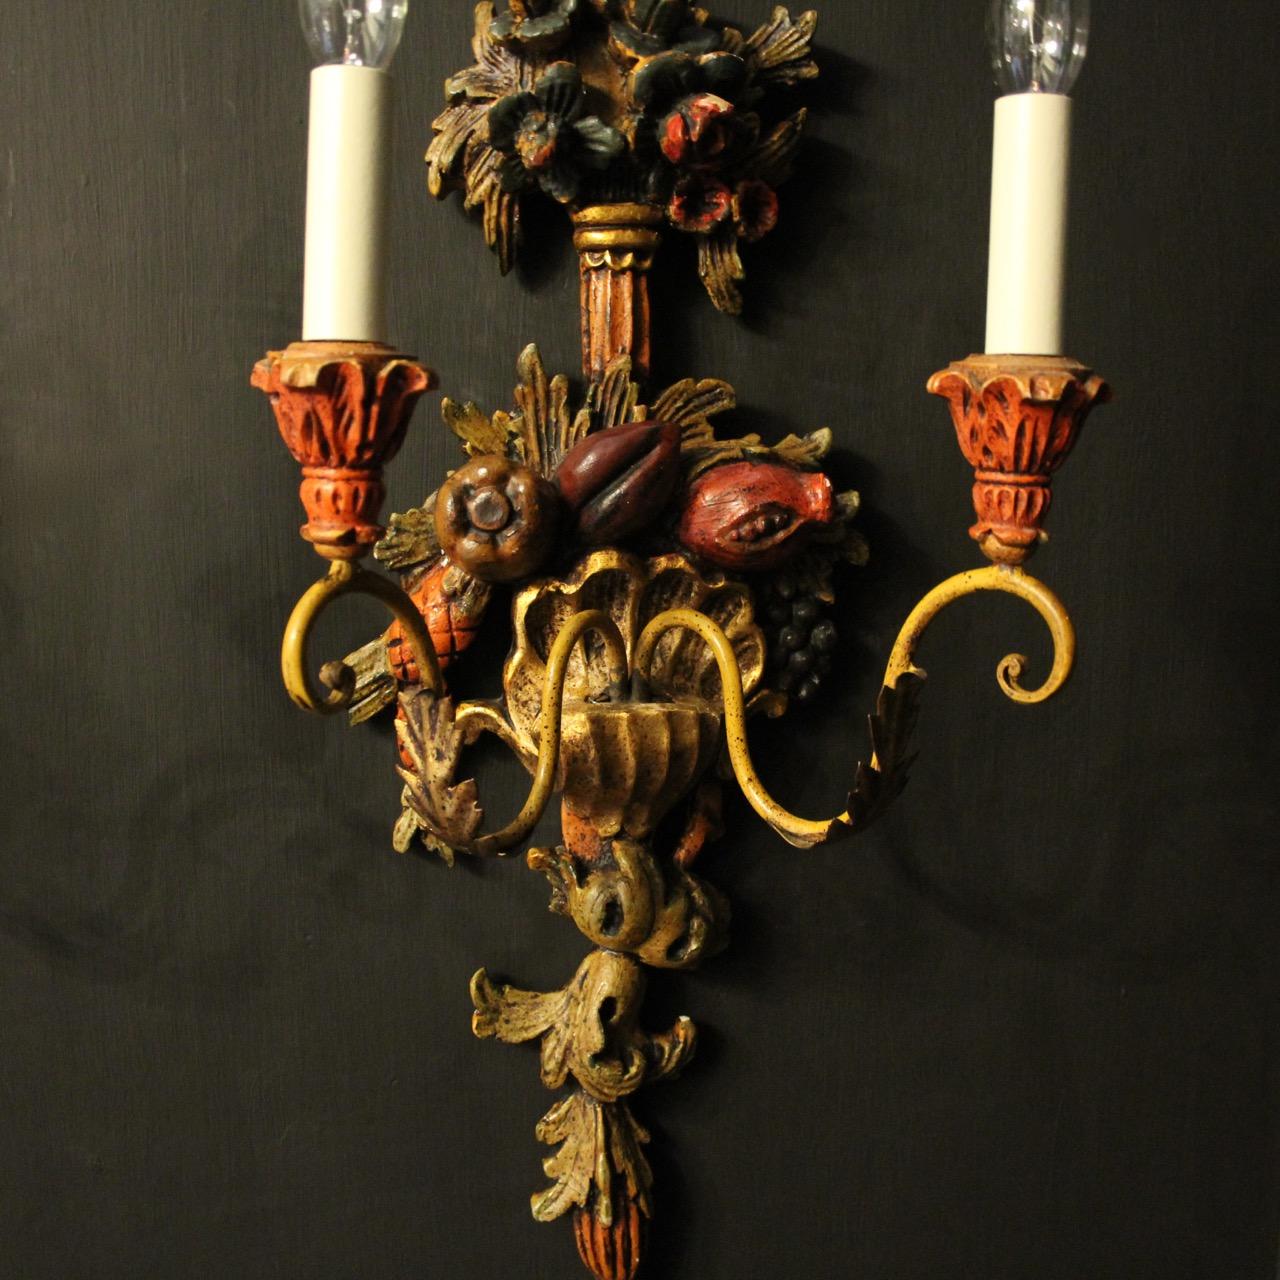 A decorative Italian polychrome and toleware painted carved wood twin arm wall lights, the metal leaf scrolling arms with carved wooden candle sconces, issuing from a ornately carved decorative floral and fruit clad carved wooden polychrome